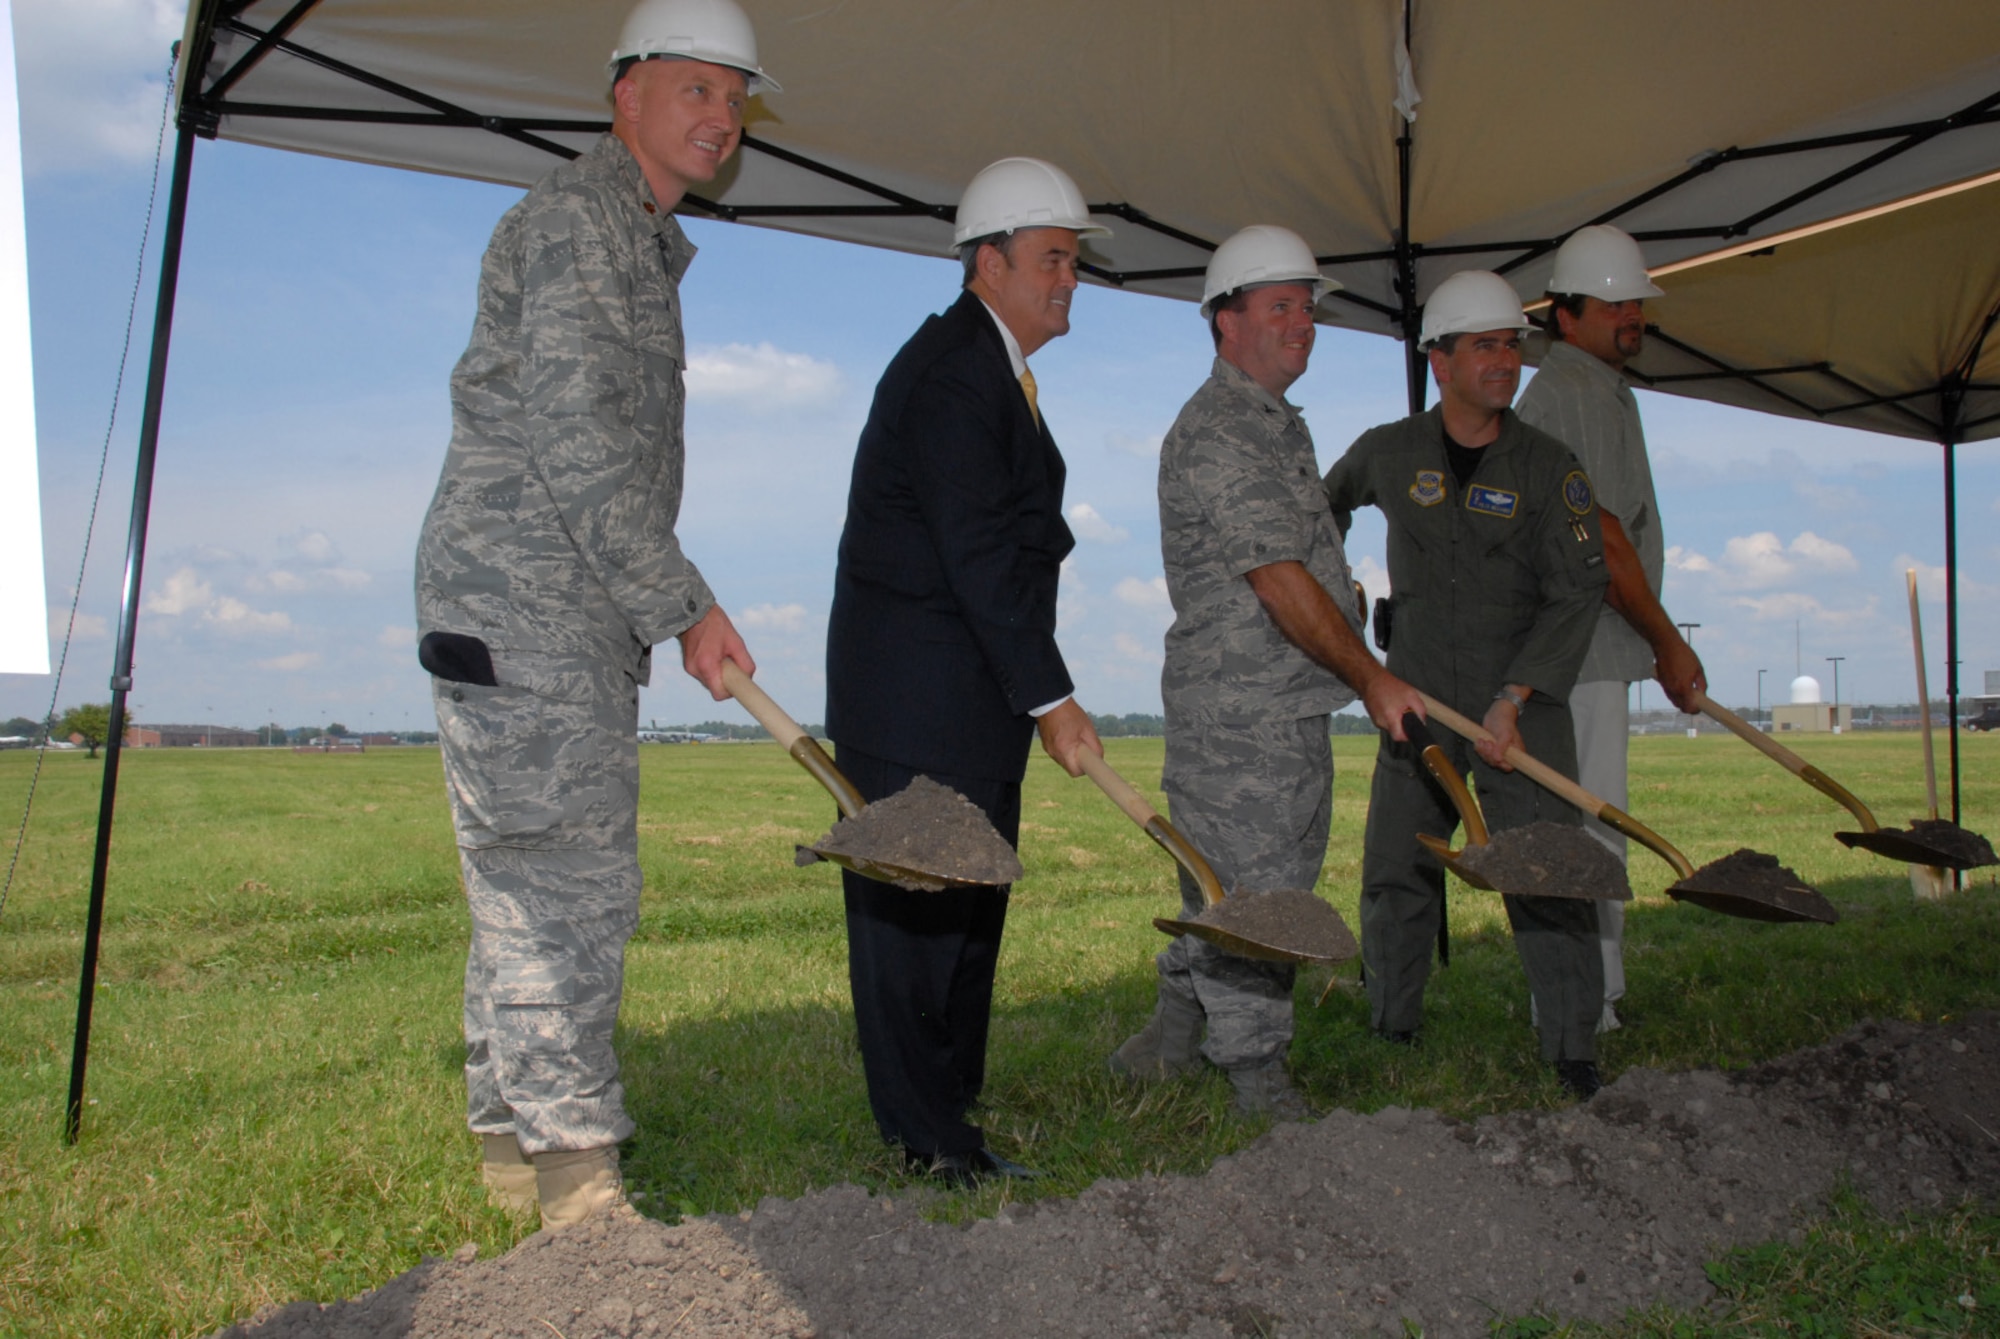 SCOTT AIR FORCE BASE, Ill. - (L - R) Maj. Robert Rossi, commander of the 375th Security Forces Squadron, the Honorable Jerry F. Costello, U.S. Congressman for Illinois 12th District, Col. Alan Hunt, 375th Airlift Wing commander, Col. Peter Nezamis, commander of the 126th Air Refueling Wing, and a representative from Scott Alliance Joint Venture, Inc. break ground for the new Security Forces Operations Facility.  The state of the art building will provide work and training areas for active duty personnel from the 375th Airlift Wing and Illinois Air National Guardsmen from the 126th Air Refueling Wing. (U.S. Air Force photo by Master Sgt. Ken Stephens)